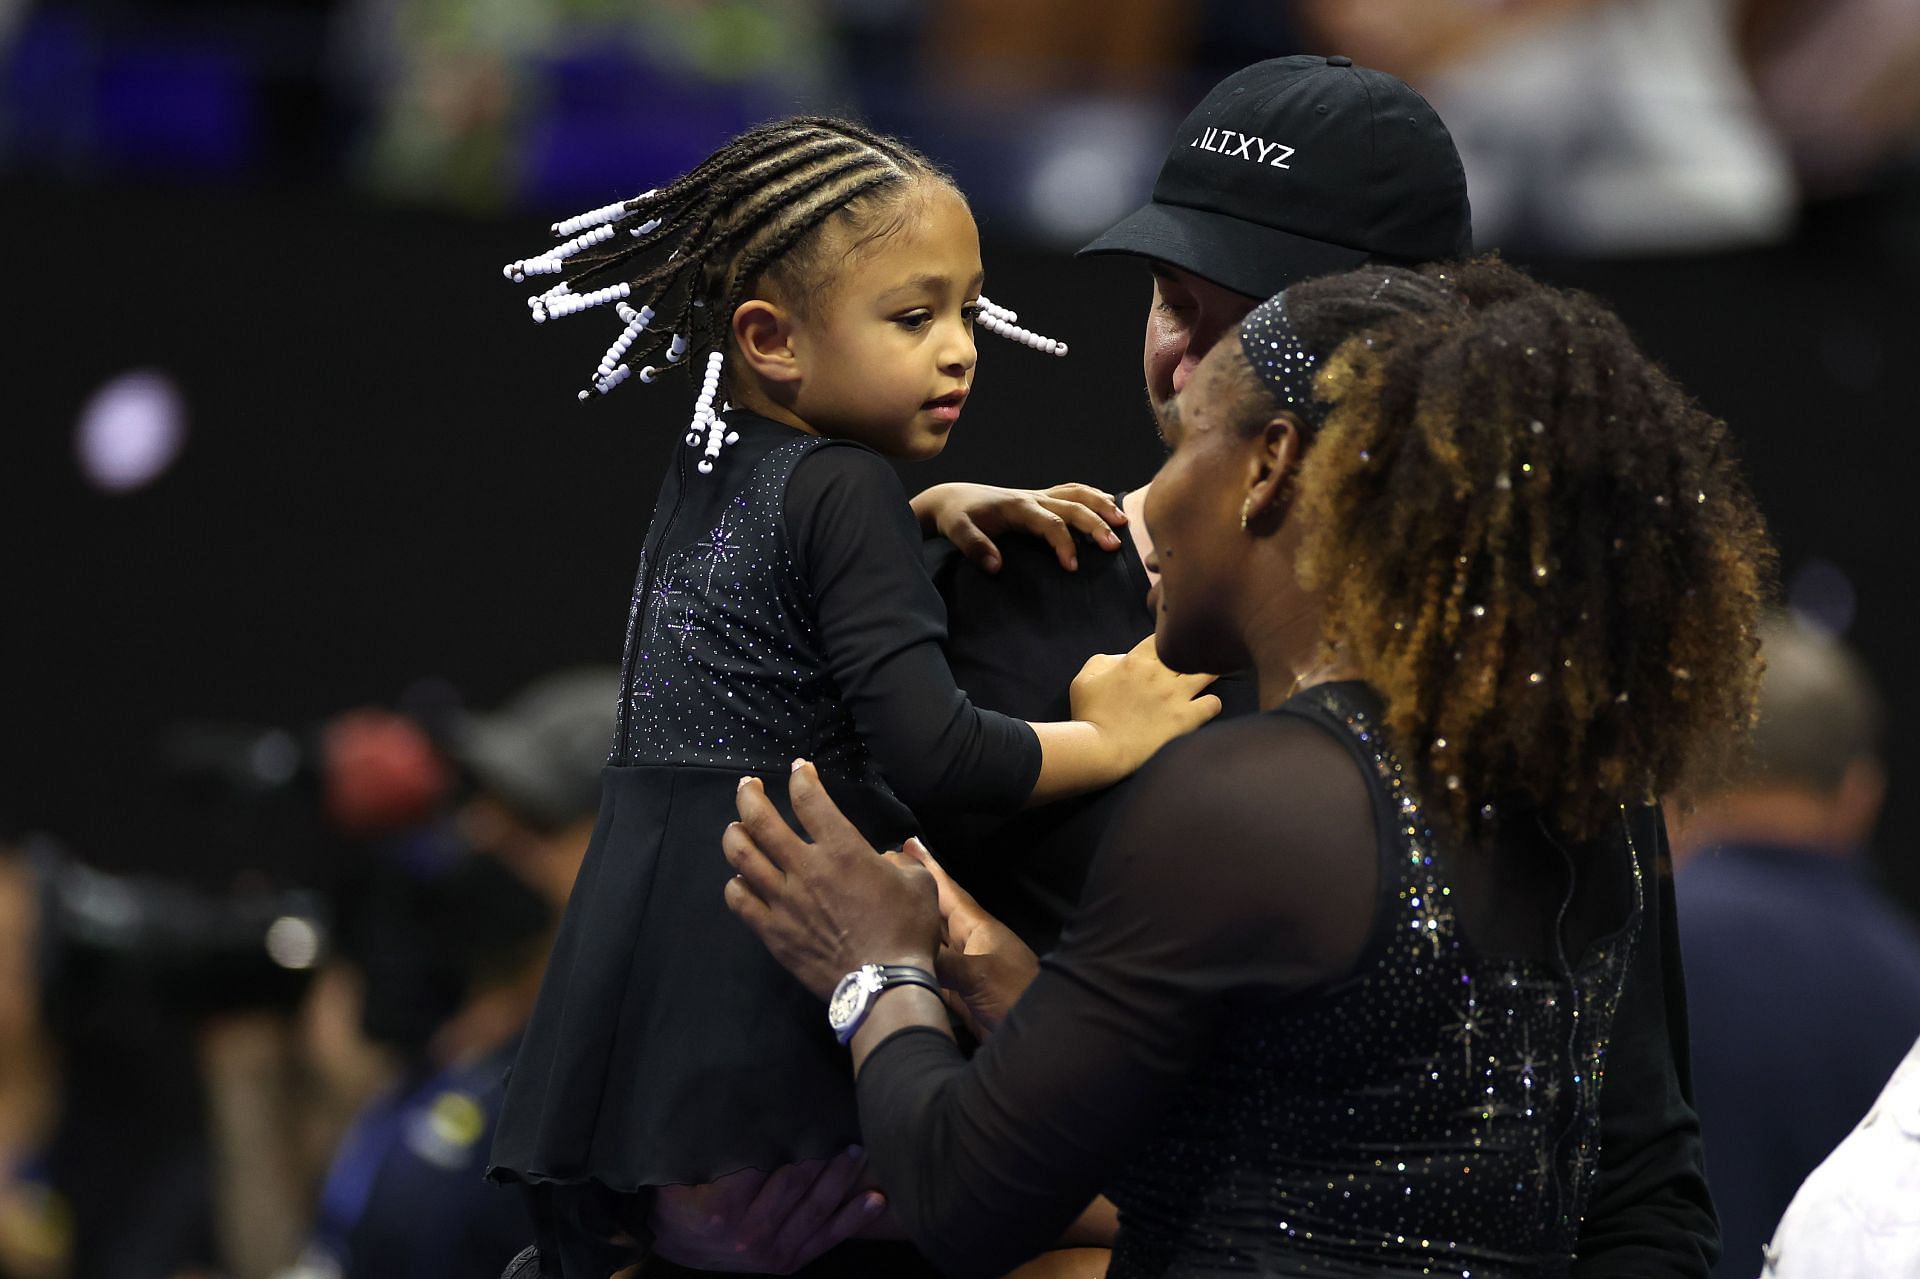 Williams and her daughter at the 2022 US Open